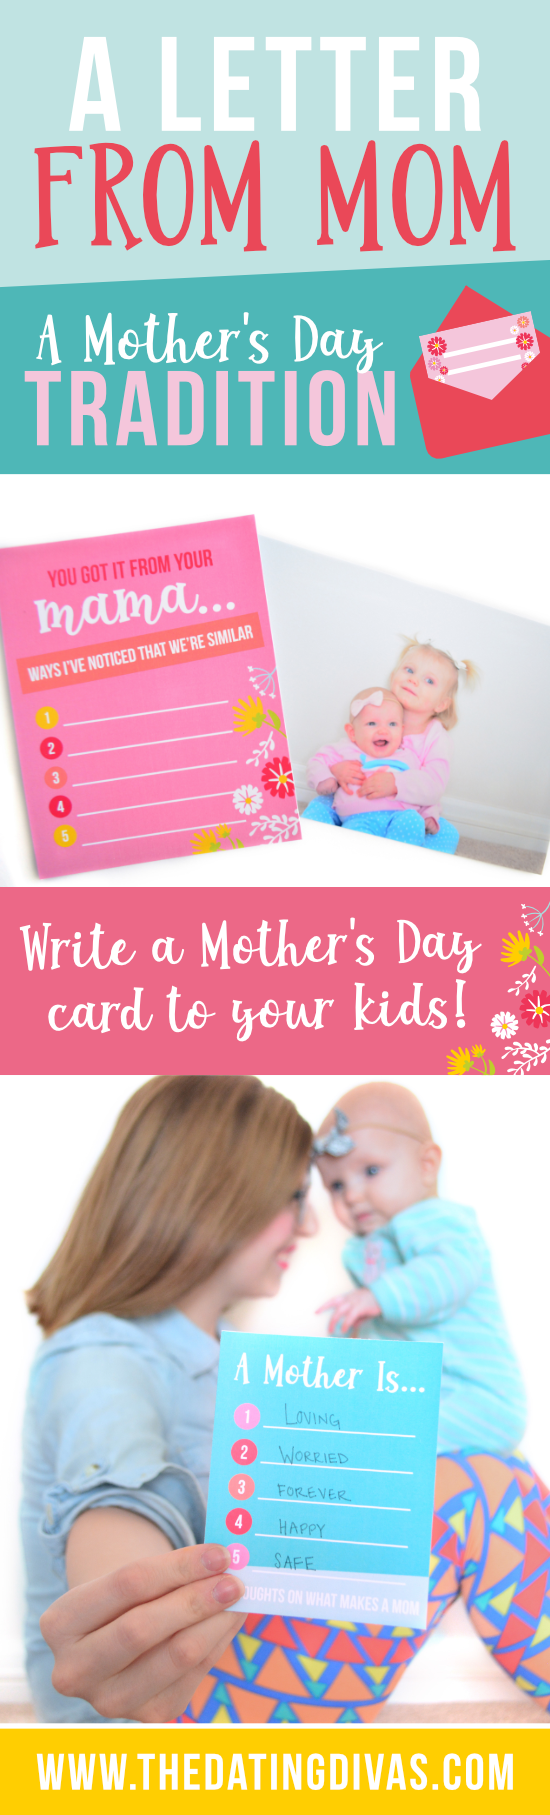 I've always wondered how to save those sweet Mother's Day feelings for my kiddos - this totally solves the problem! #MothersDay #MothersDayMessage #LetterToMyKids